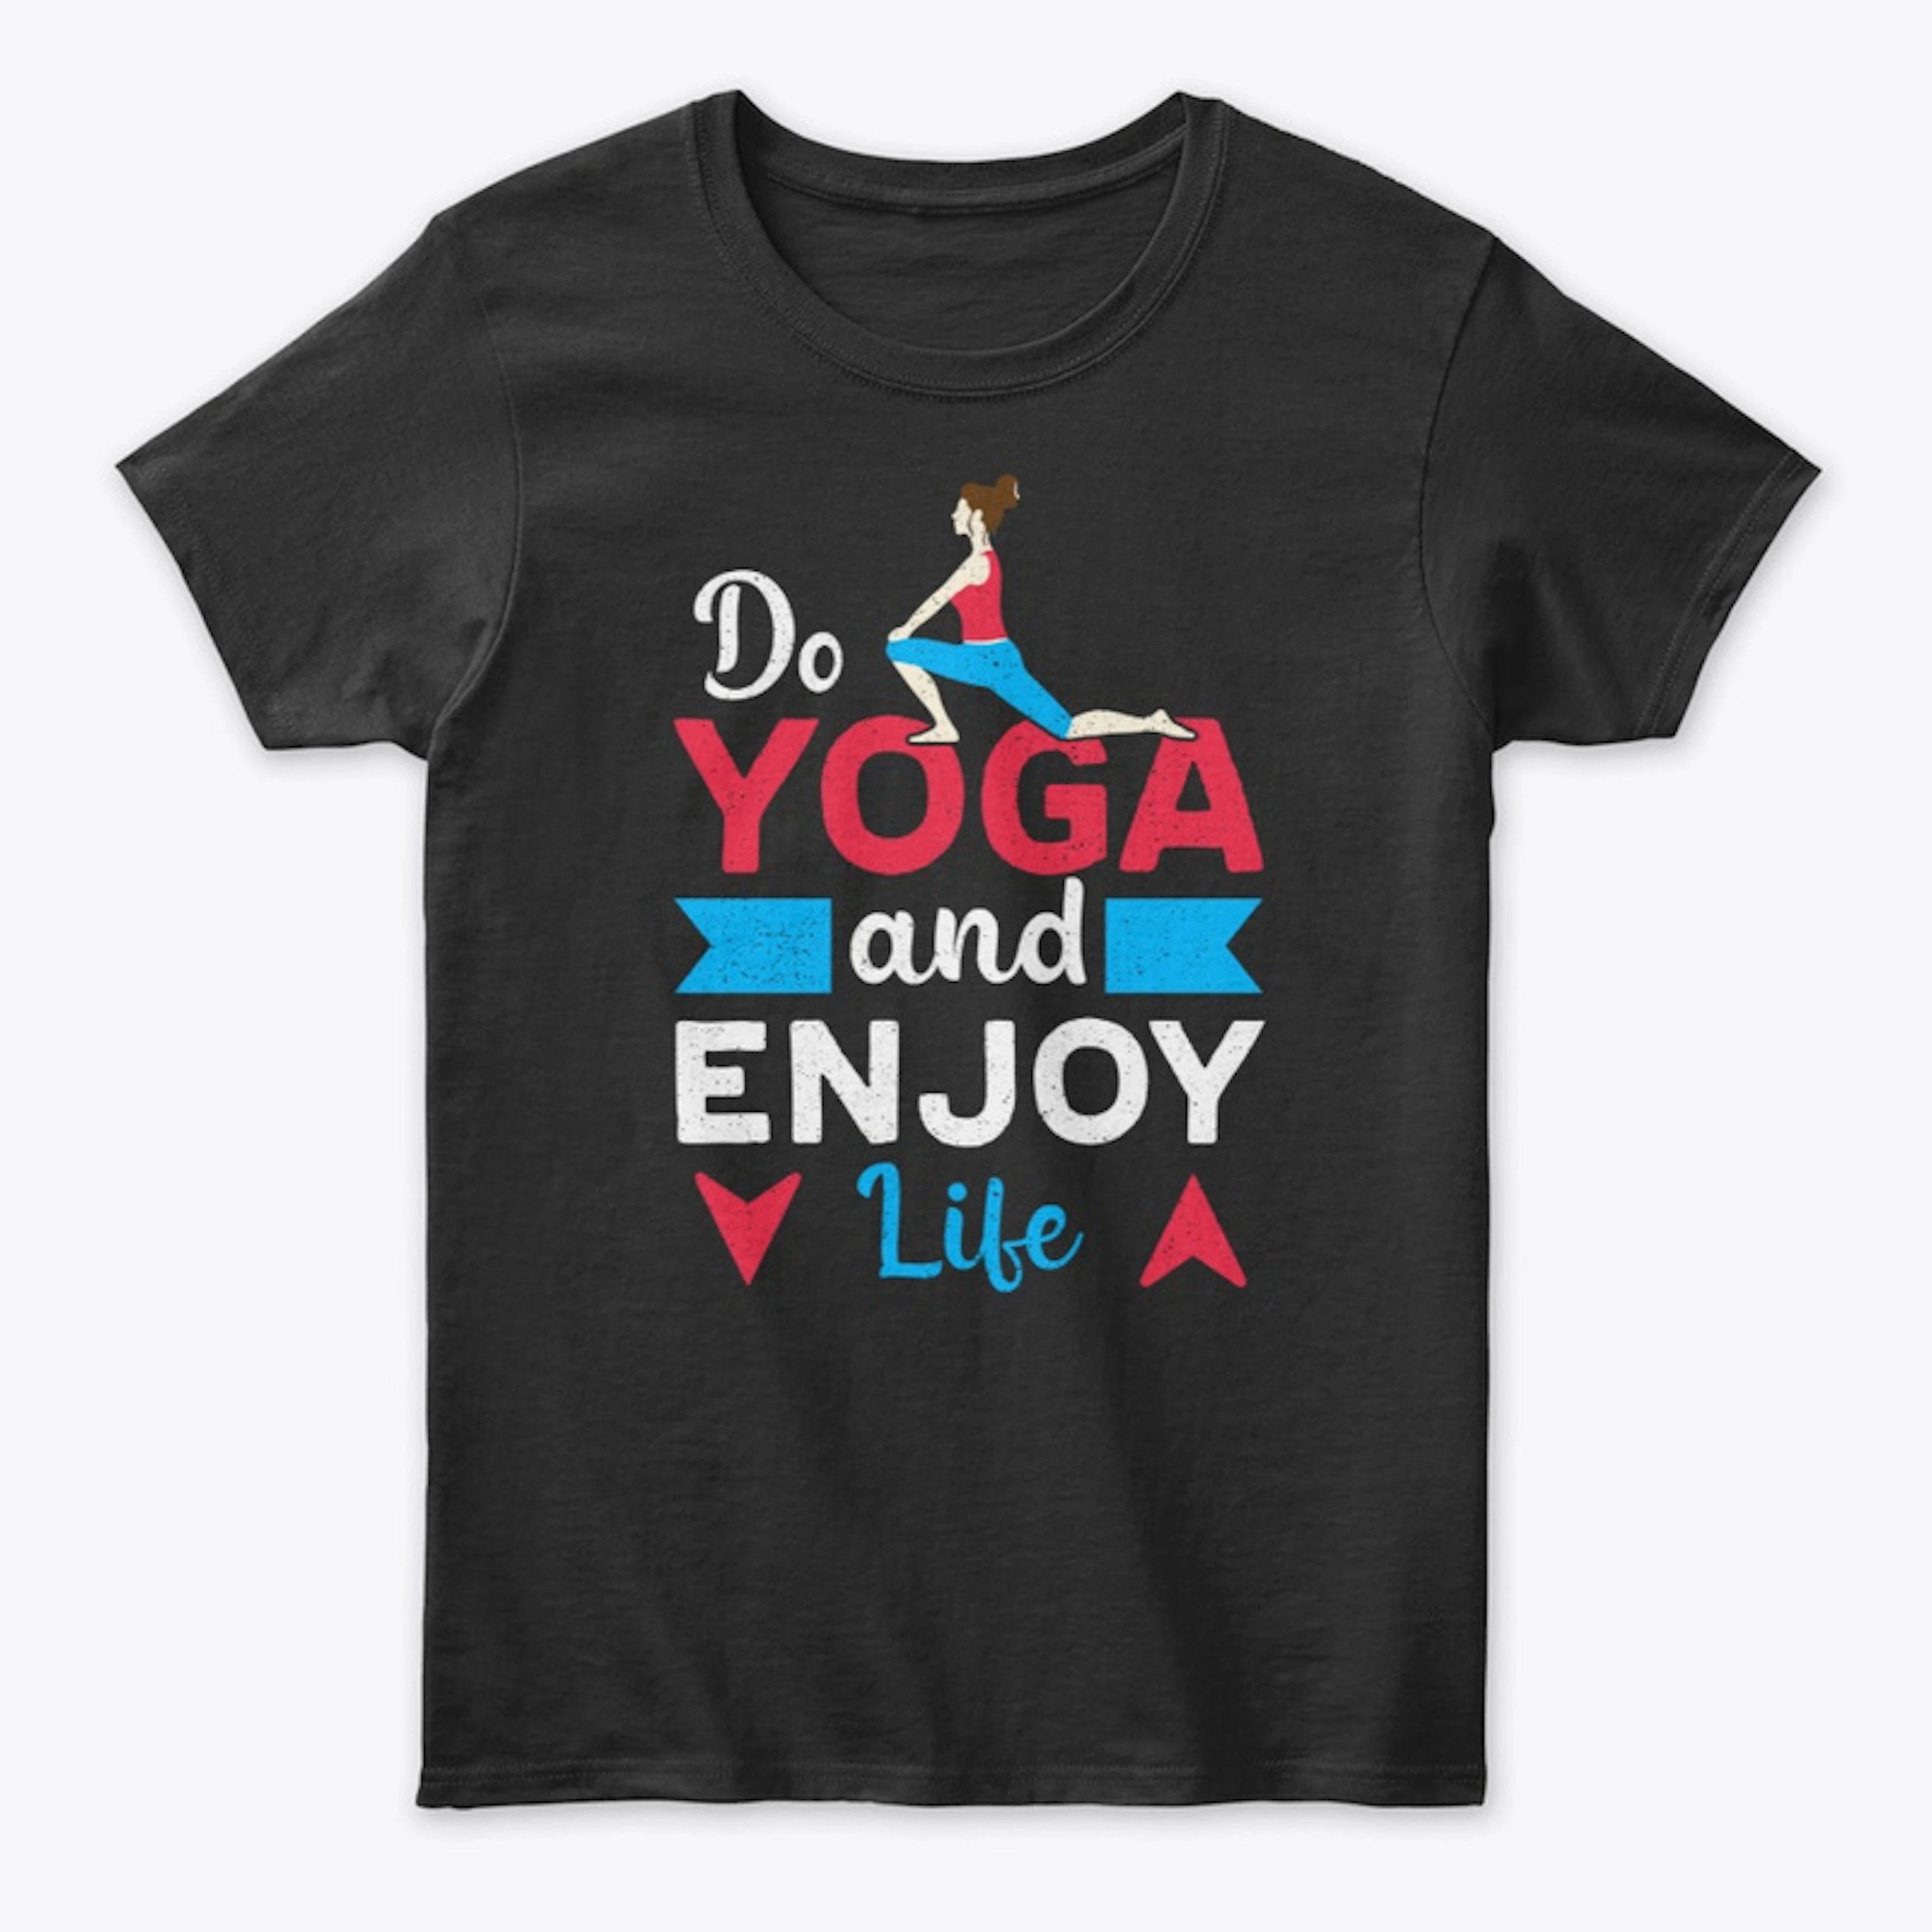 LIMITED EDTIONS| DO YOGA AND ENJOY